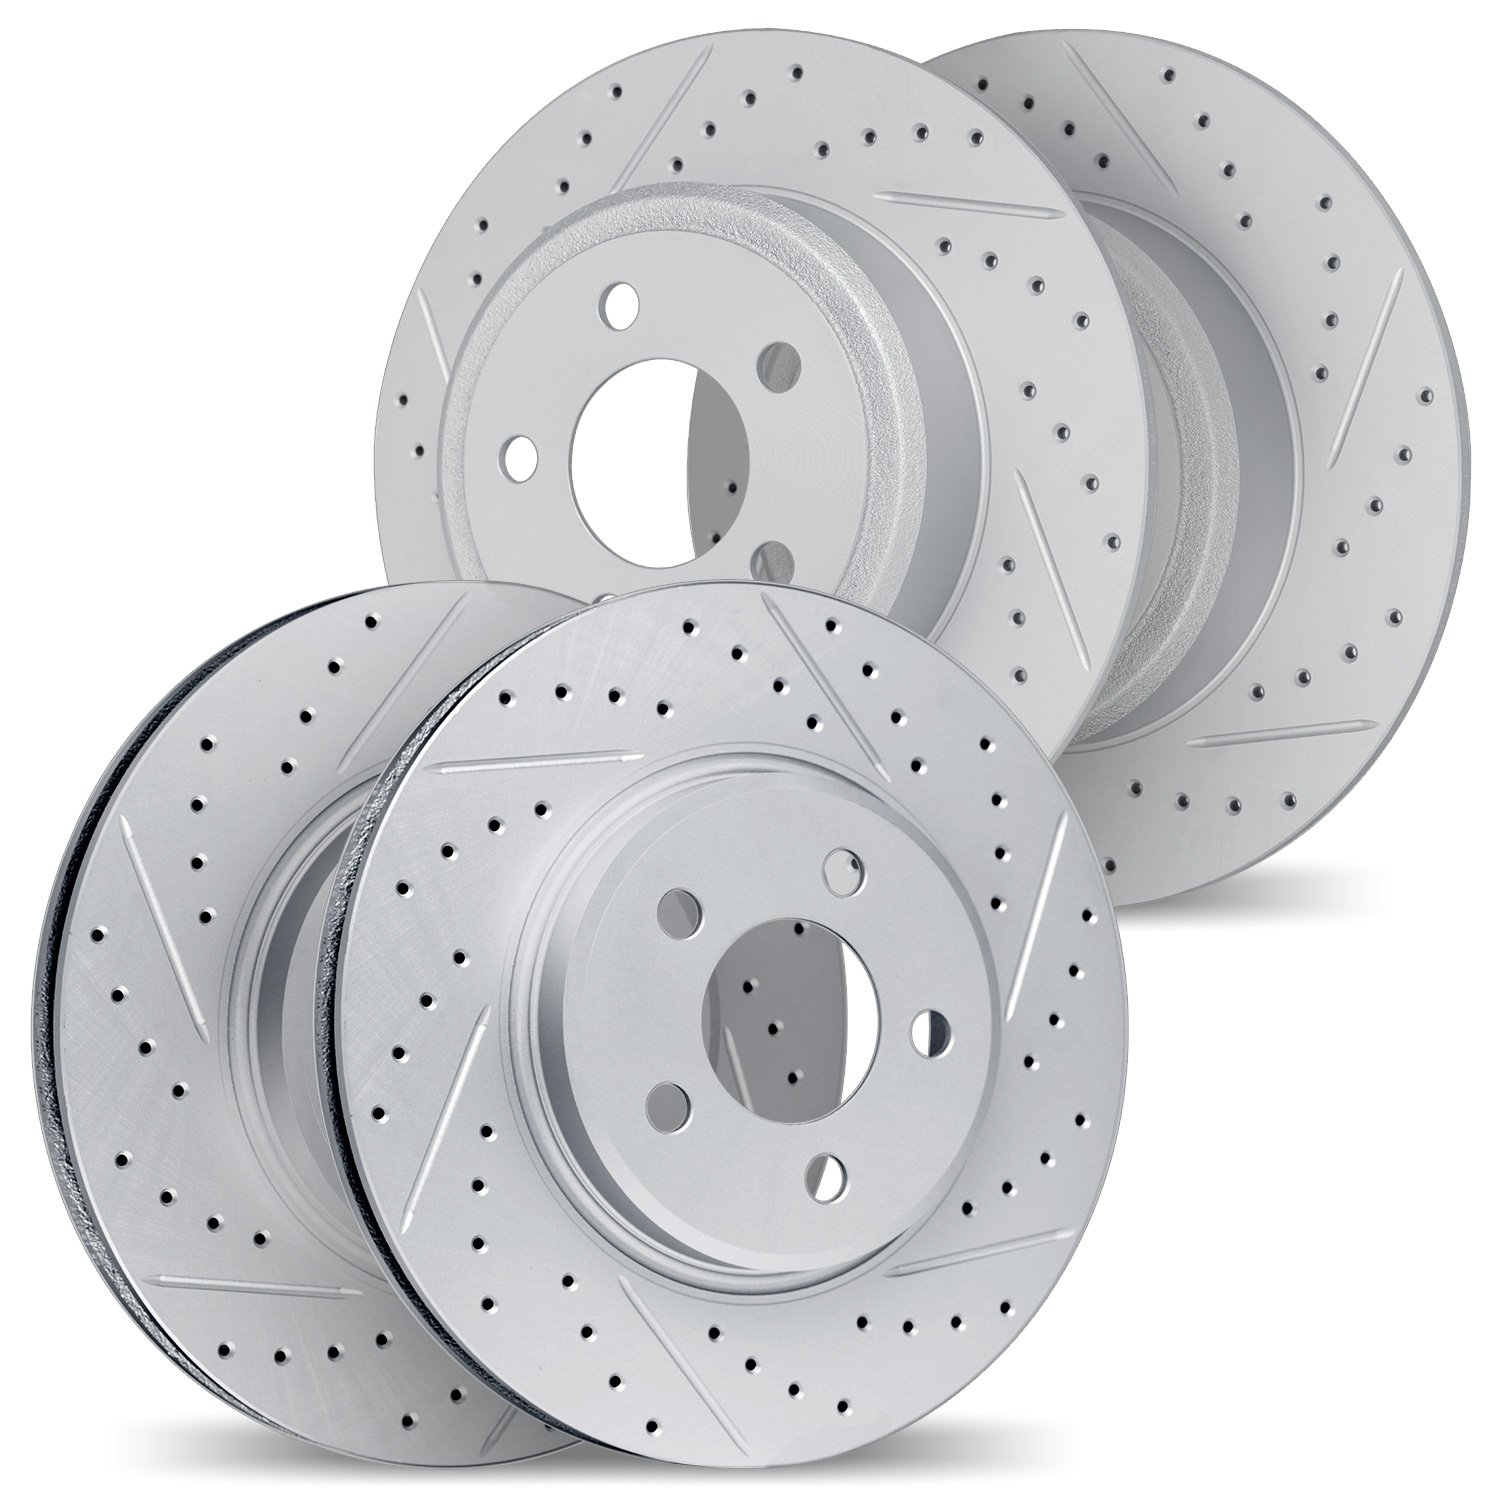 2004-63012 Geoperformance Drilled/Slotted Brake Rotors, 2006-2011 Mercedes-Benz, Position: Front and Rear